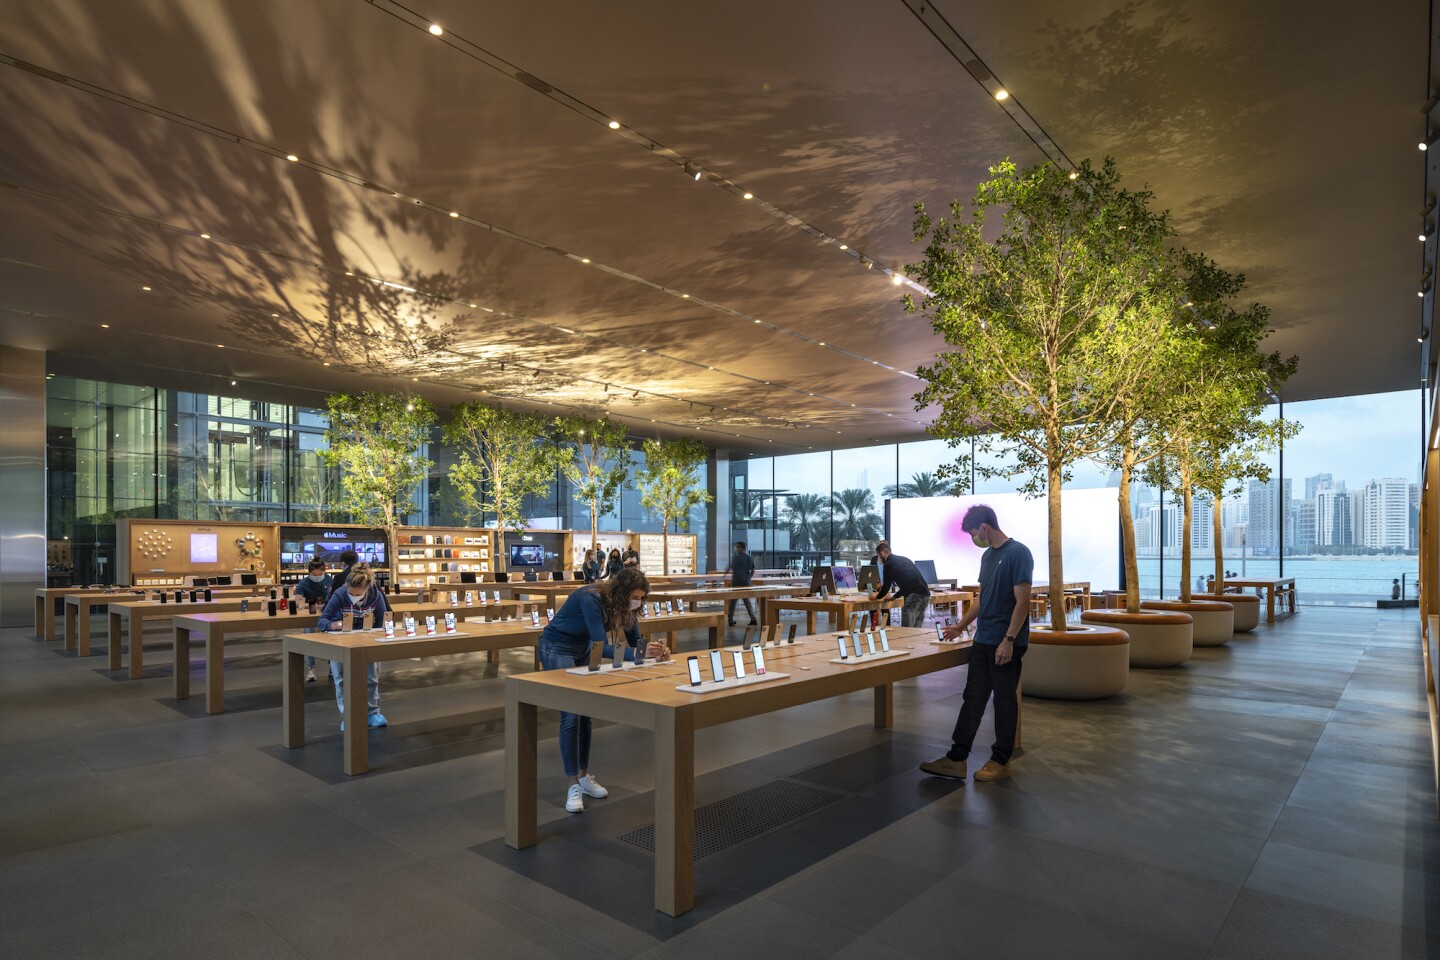 Apple Al Maryah Island's overall decor will be familiar to those who have visited other Apple Stores